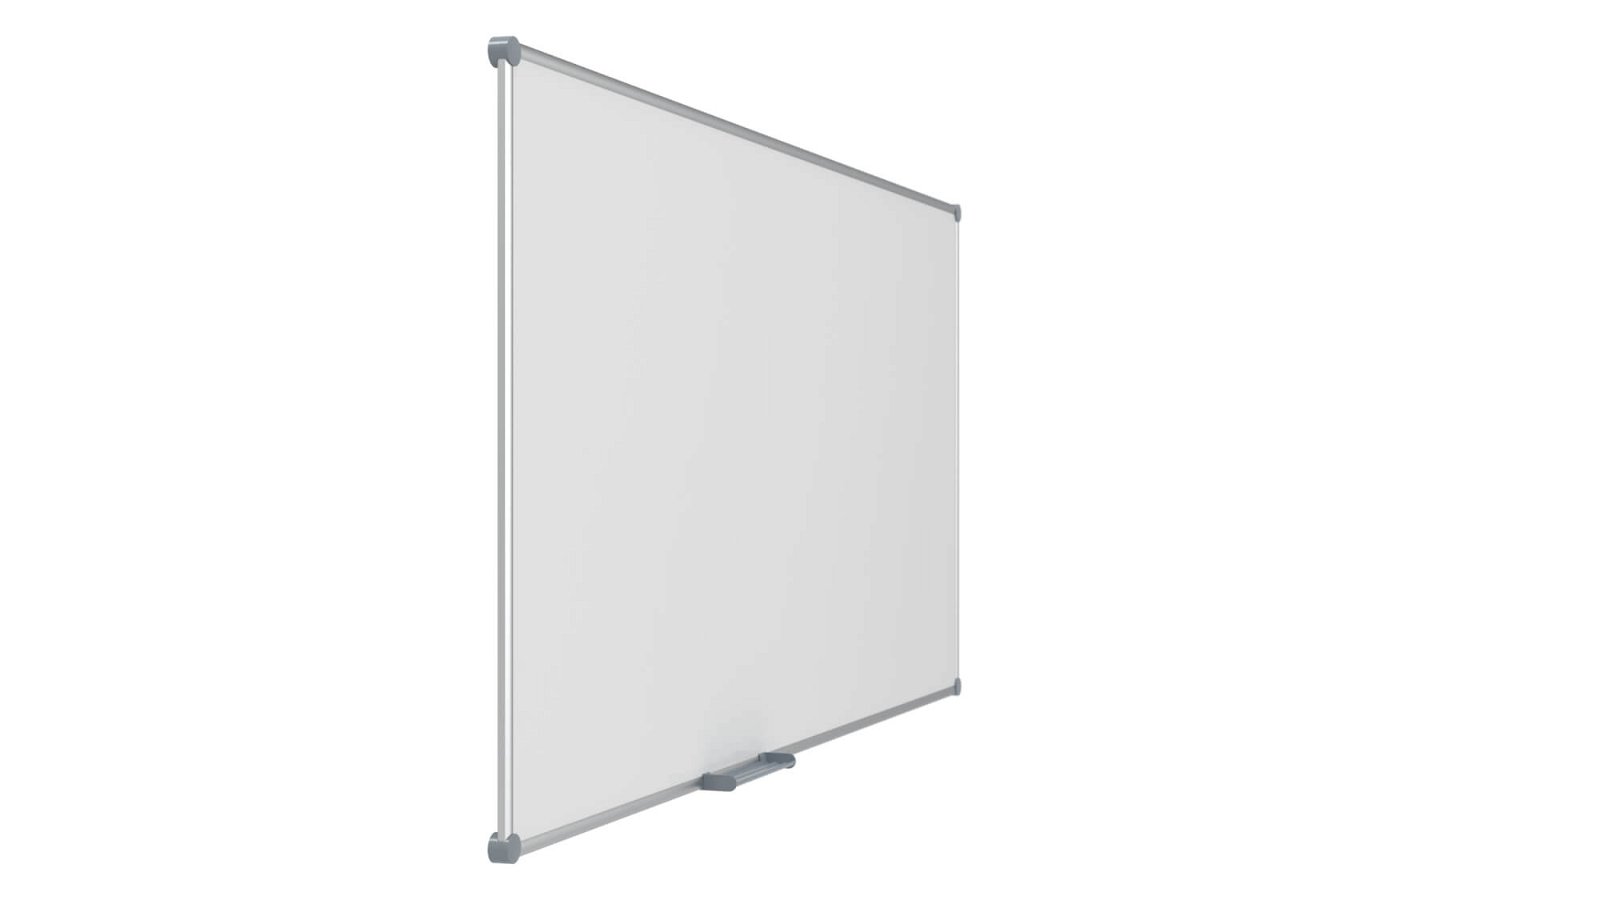 Whiteboard 2000 MAULpro, Emaille, 120x240 cm, grau